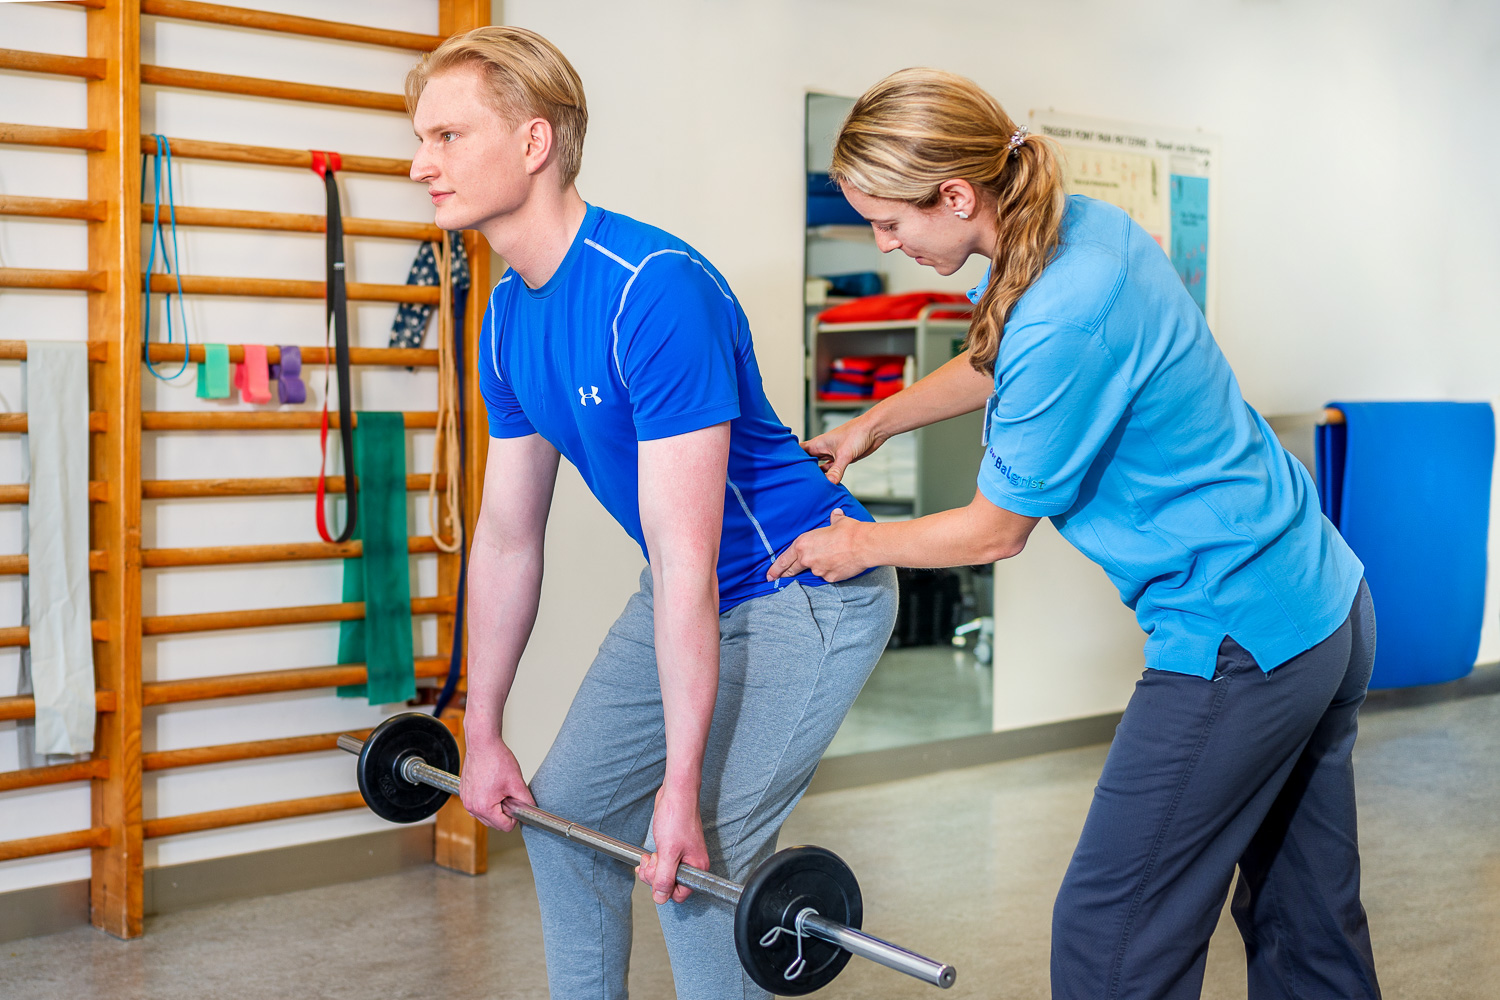 The physiotherapist pays attention to the correct posture of the patient, who performs the back exercise deadlift with a barbell.